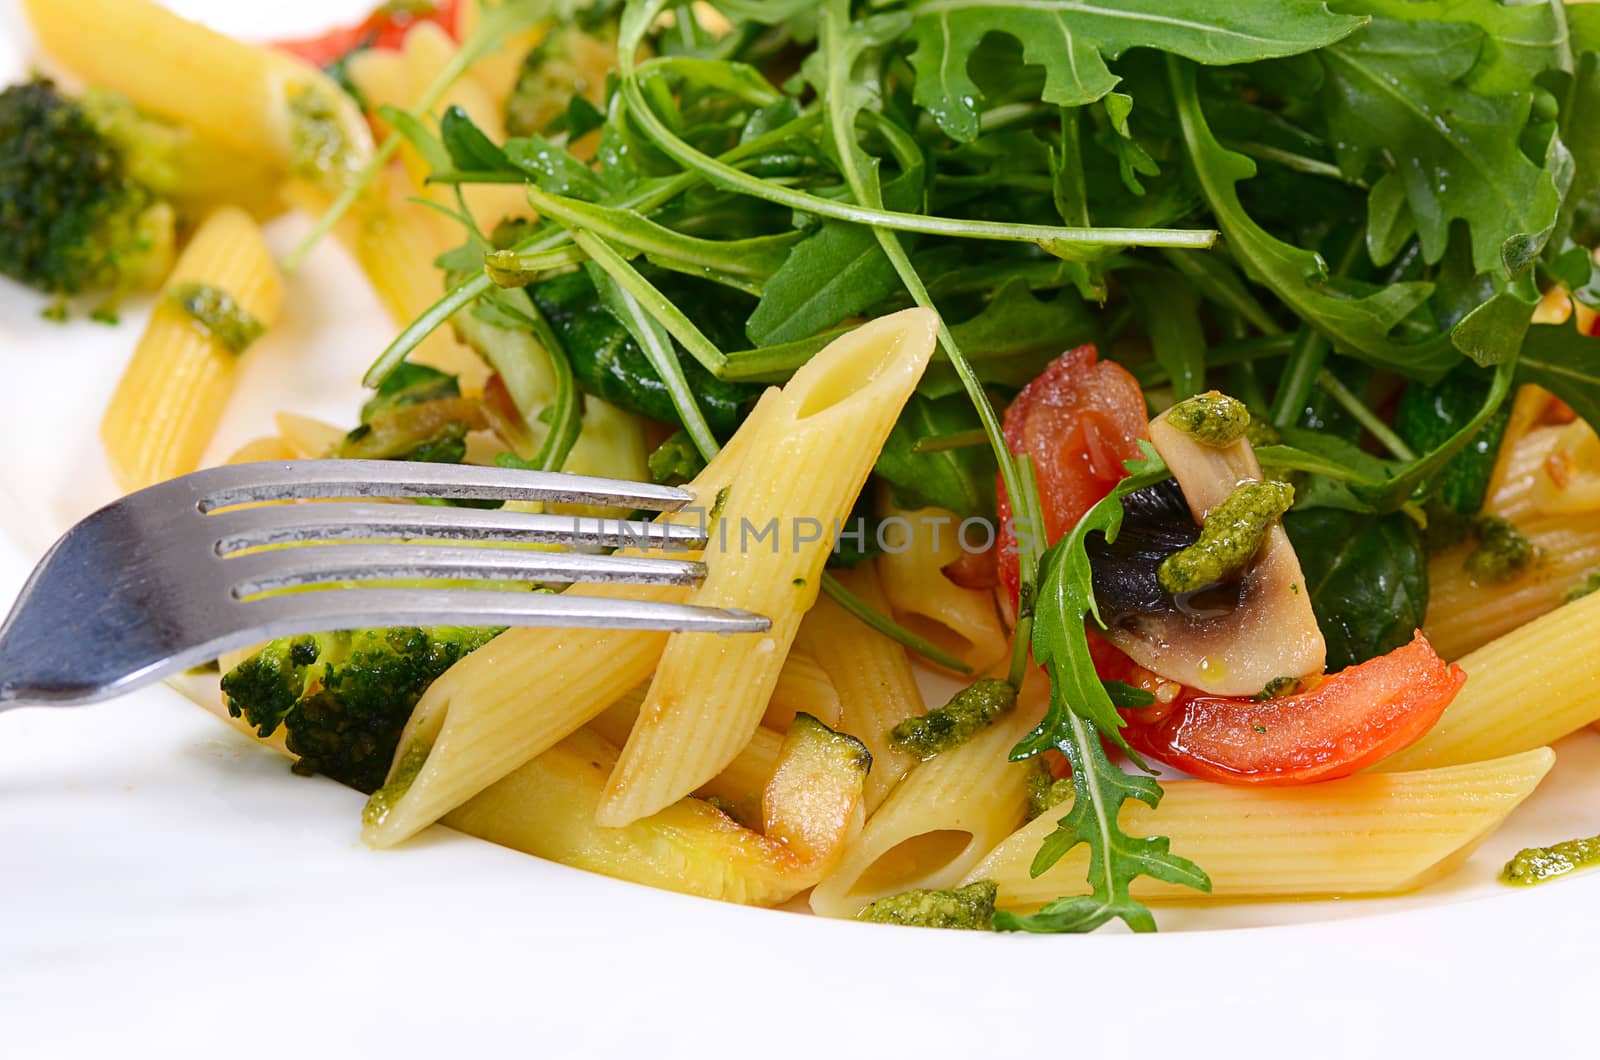 pasta with vegetables and salad close up